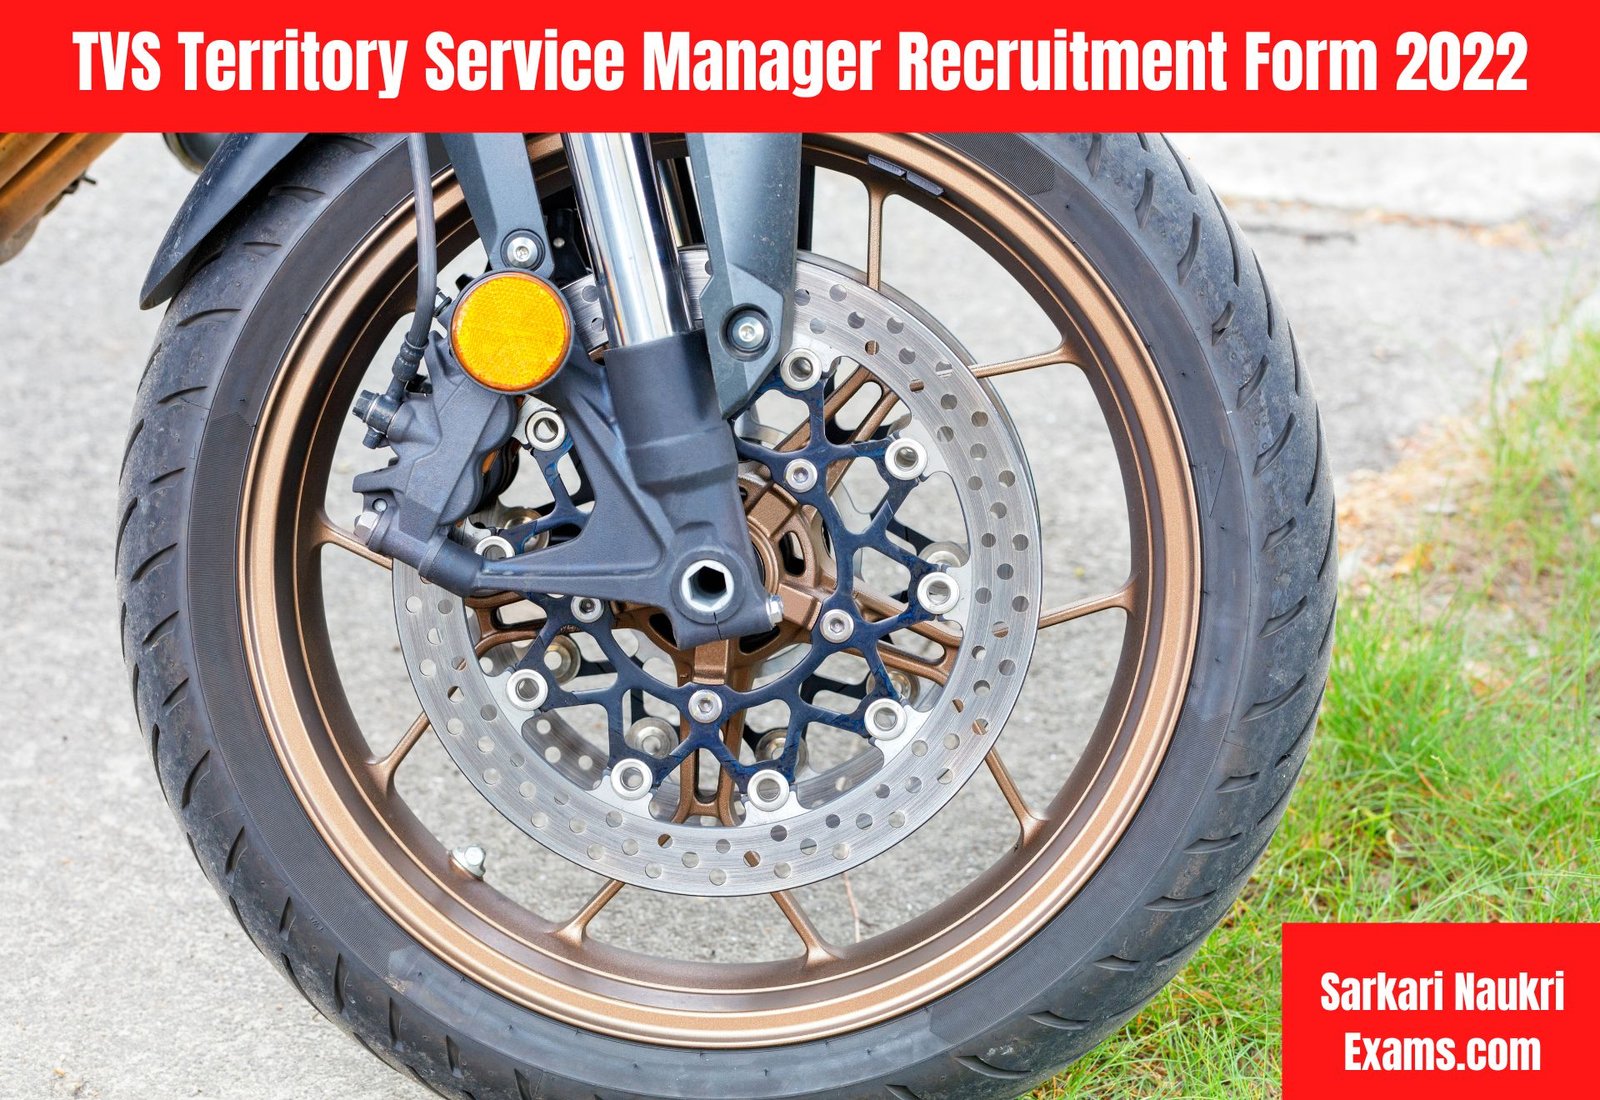 TVS Territory Service Manager Recruitment Form 2022 | Interview Based Job